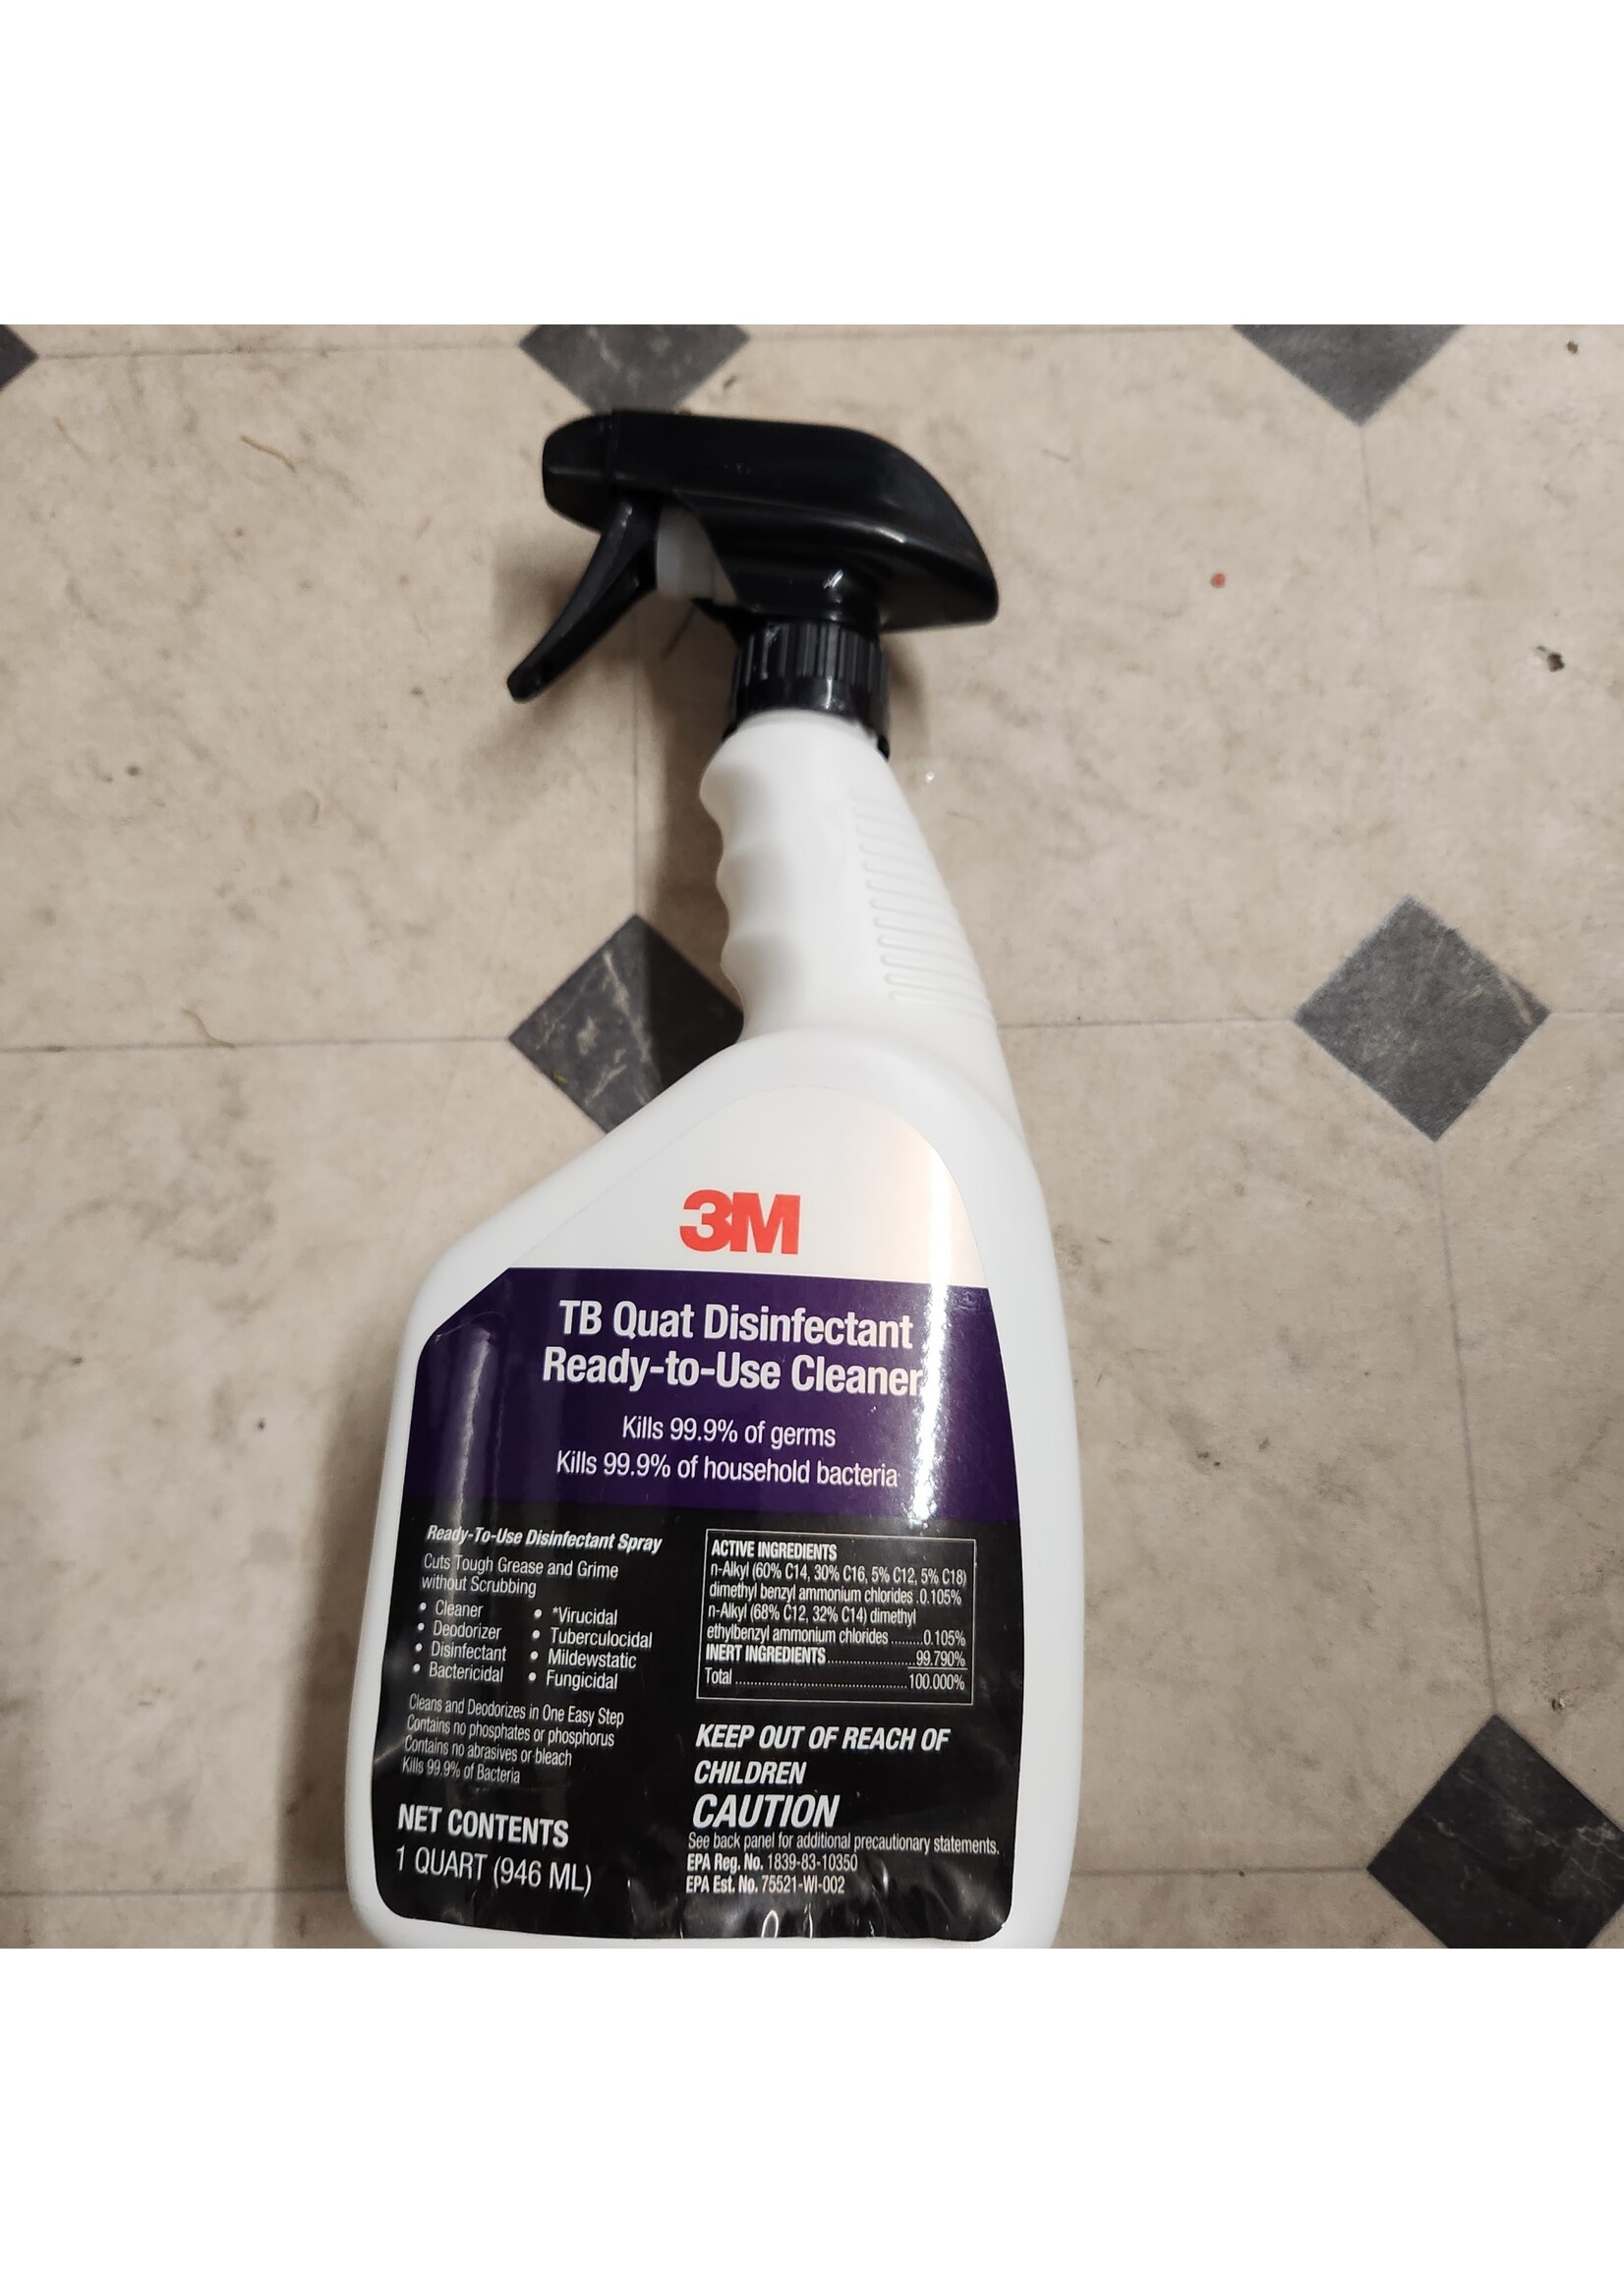 3M TB Quat Disinfectant ready to use cleaner